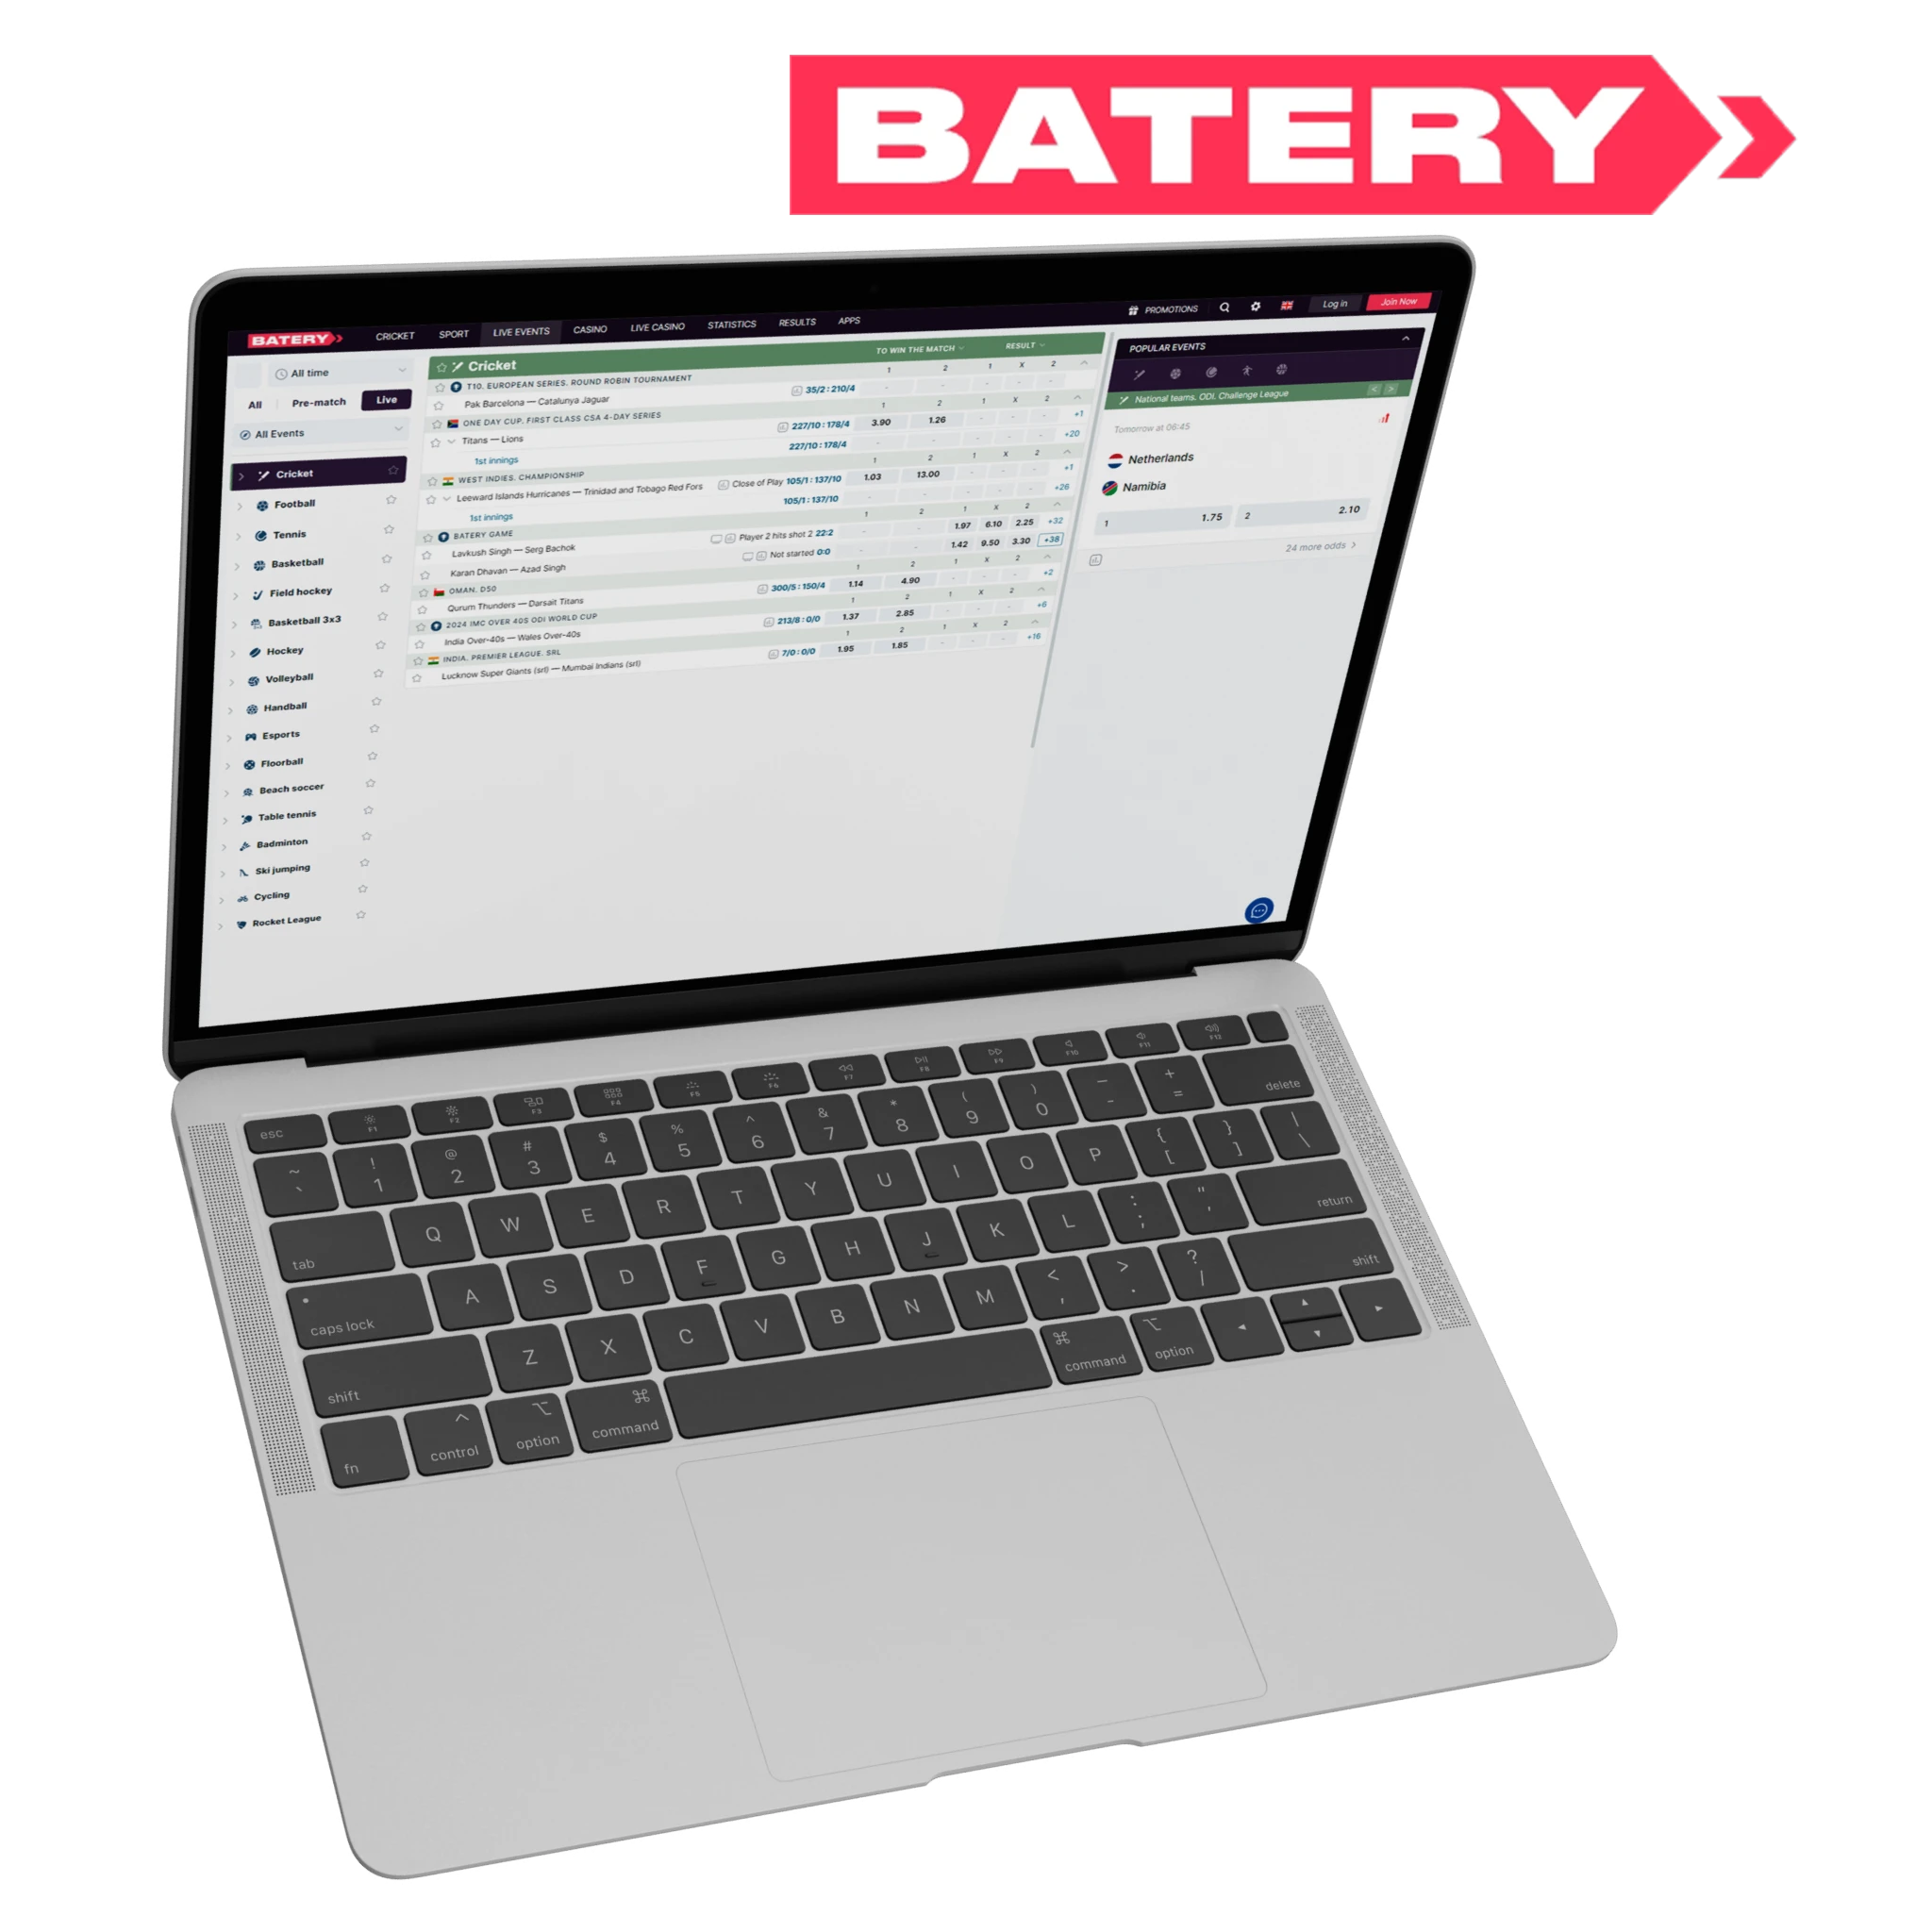 Batery provides gamers with current outcomes and cricket betting details.